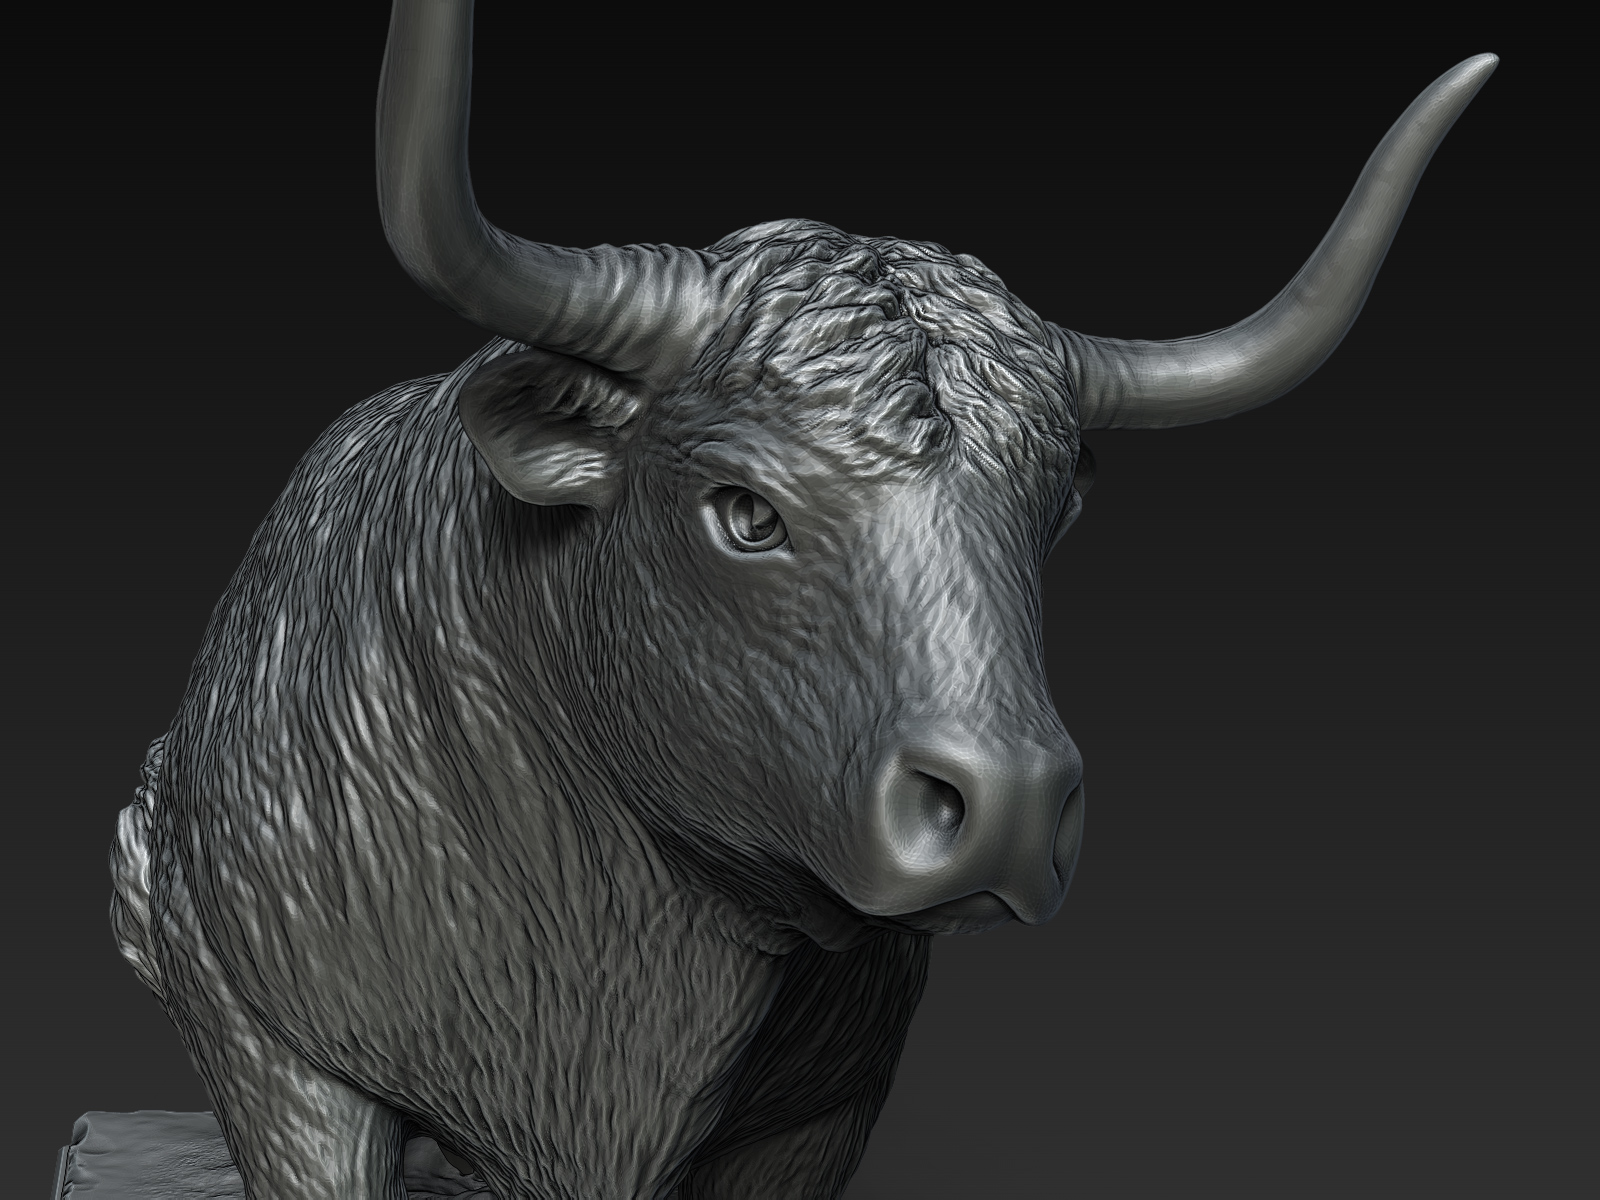 Digital sculpture of the Bull. Creation of sculpture for 3D printing and production.